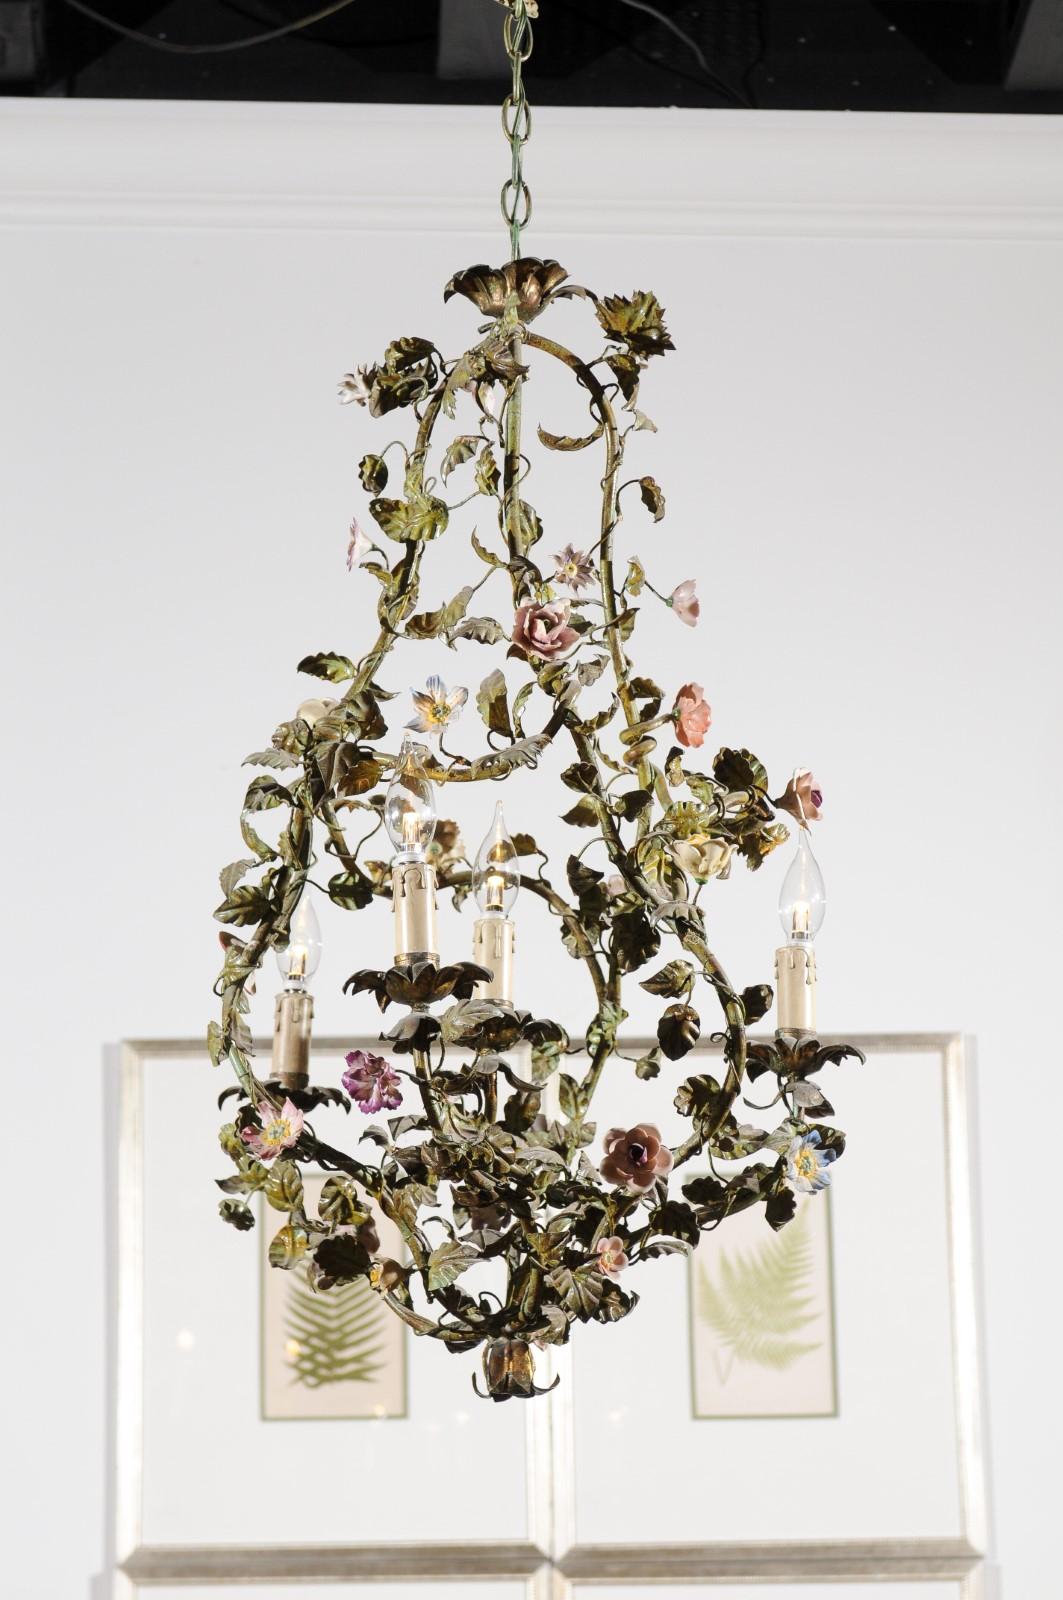 A French painted tôle bell-shaped four-light chandelier from the 19th century, with hand painted porcelain flowers. Born in France during the 19th century, this charming painted tôle chandelier captures our attention with its green foliage,